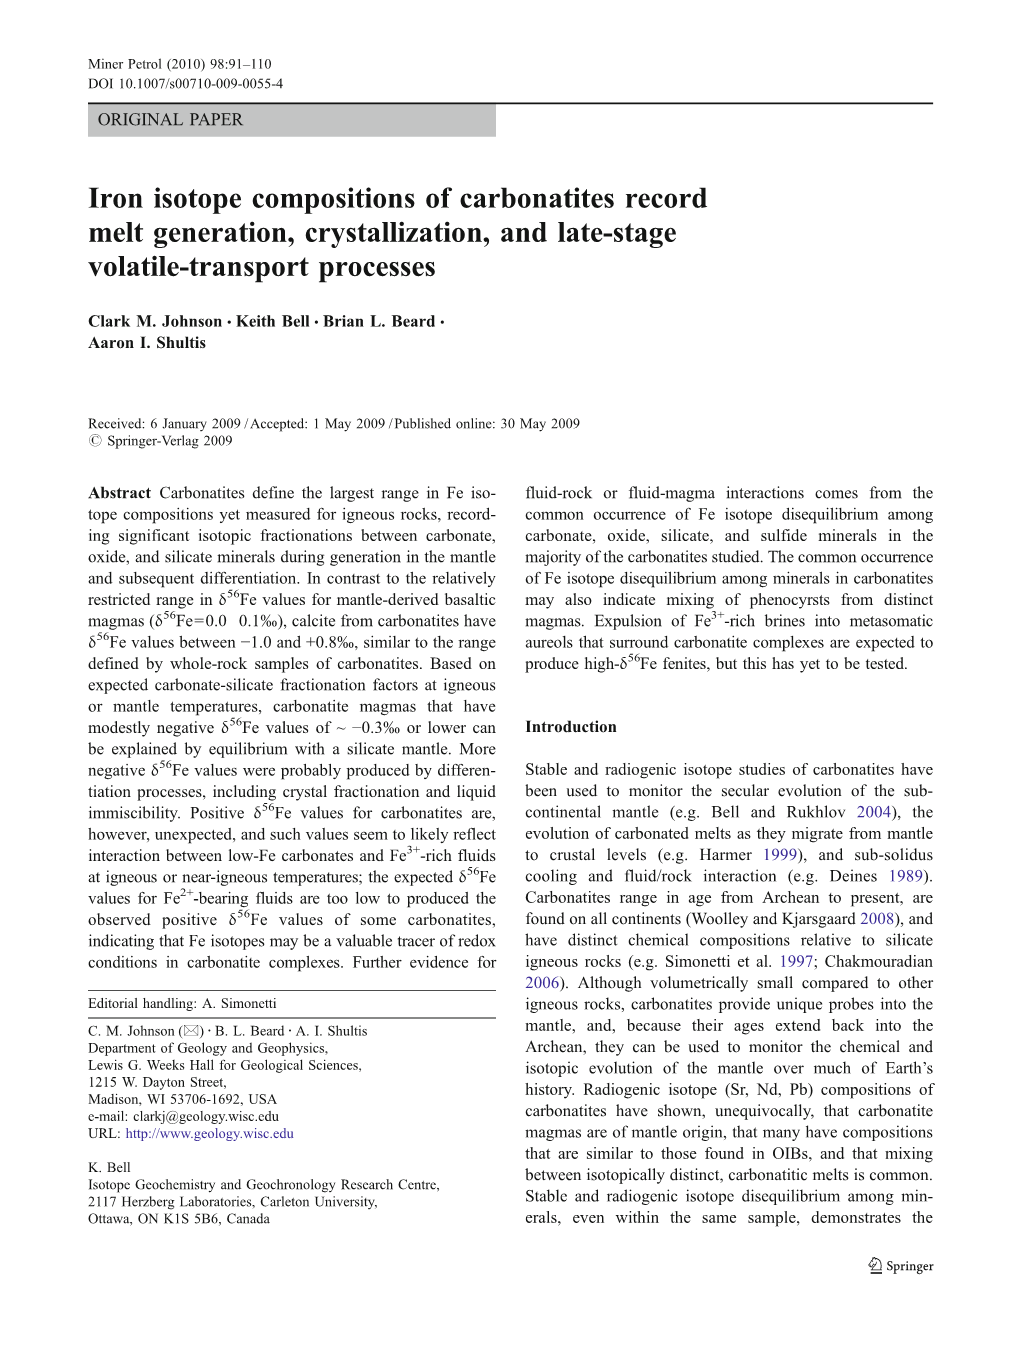 Iron Isotope Compositions of Carbonatites Record Melt Generation, Crystallization, and Late-Stage Volatile-Transport Processes